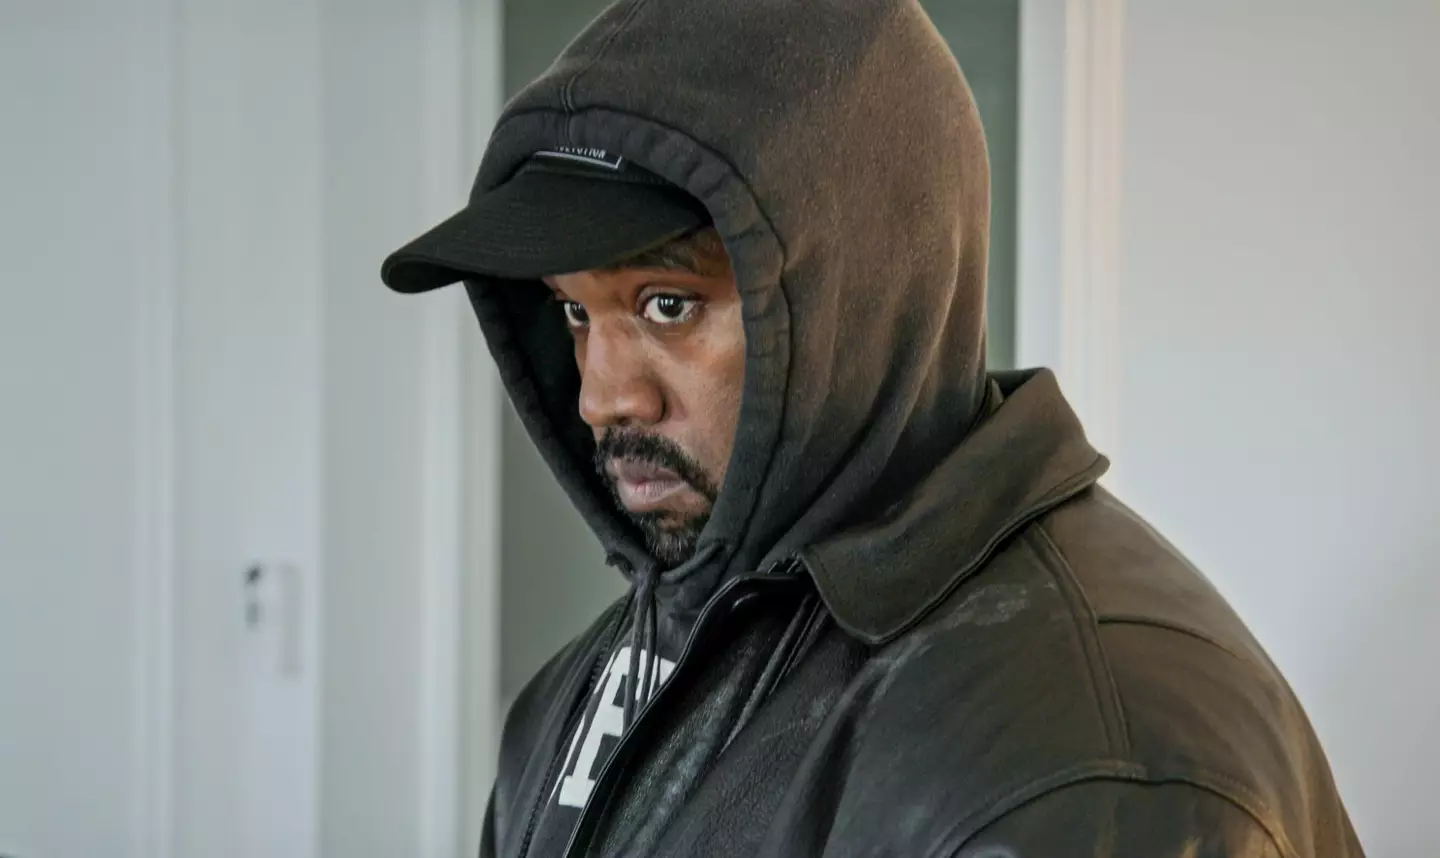 Kanye West was dumped by many brands earlier this year.